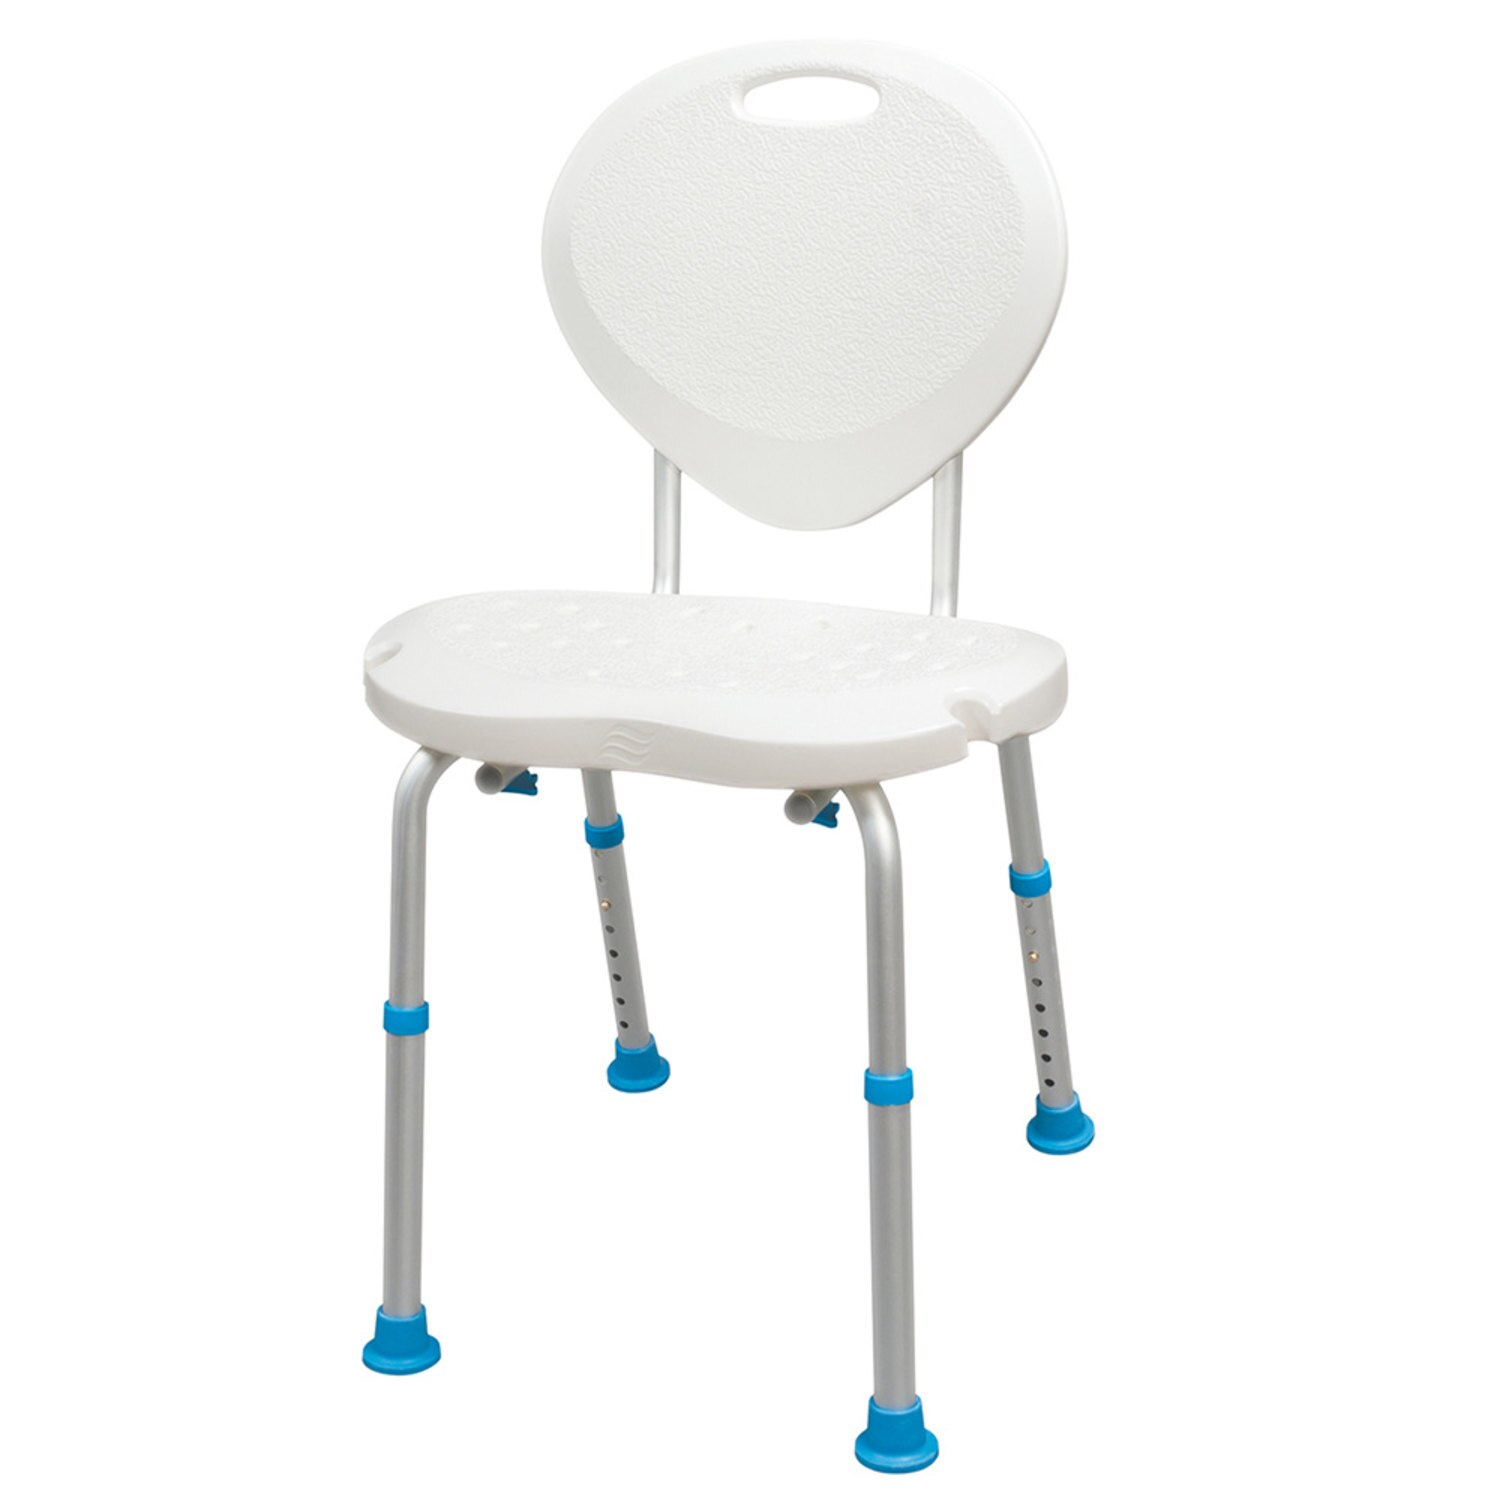 AquaSense Adjustable Bath and Shower Chair and Backrest